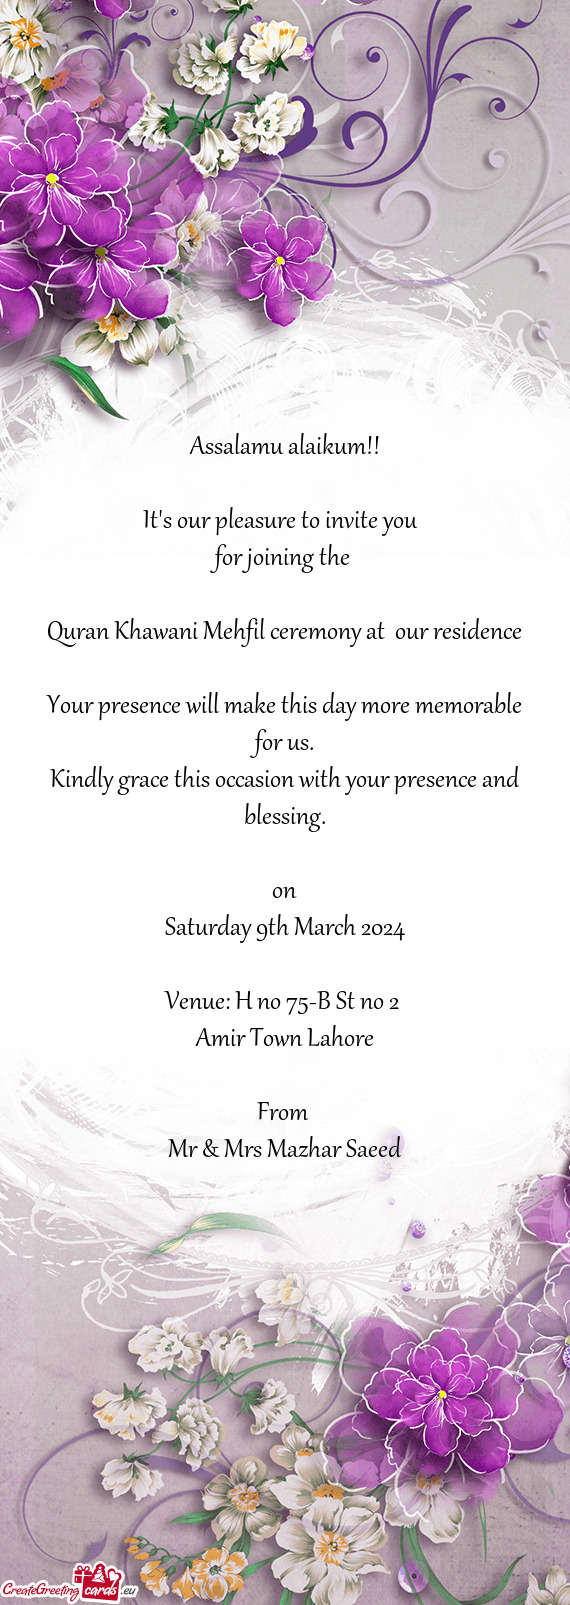 Quran Khawani Mehfil ceremony at our residence